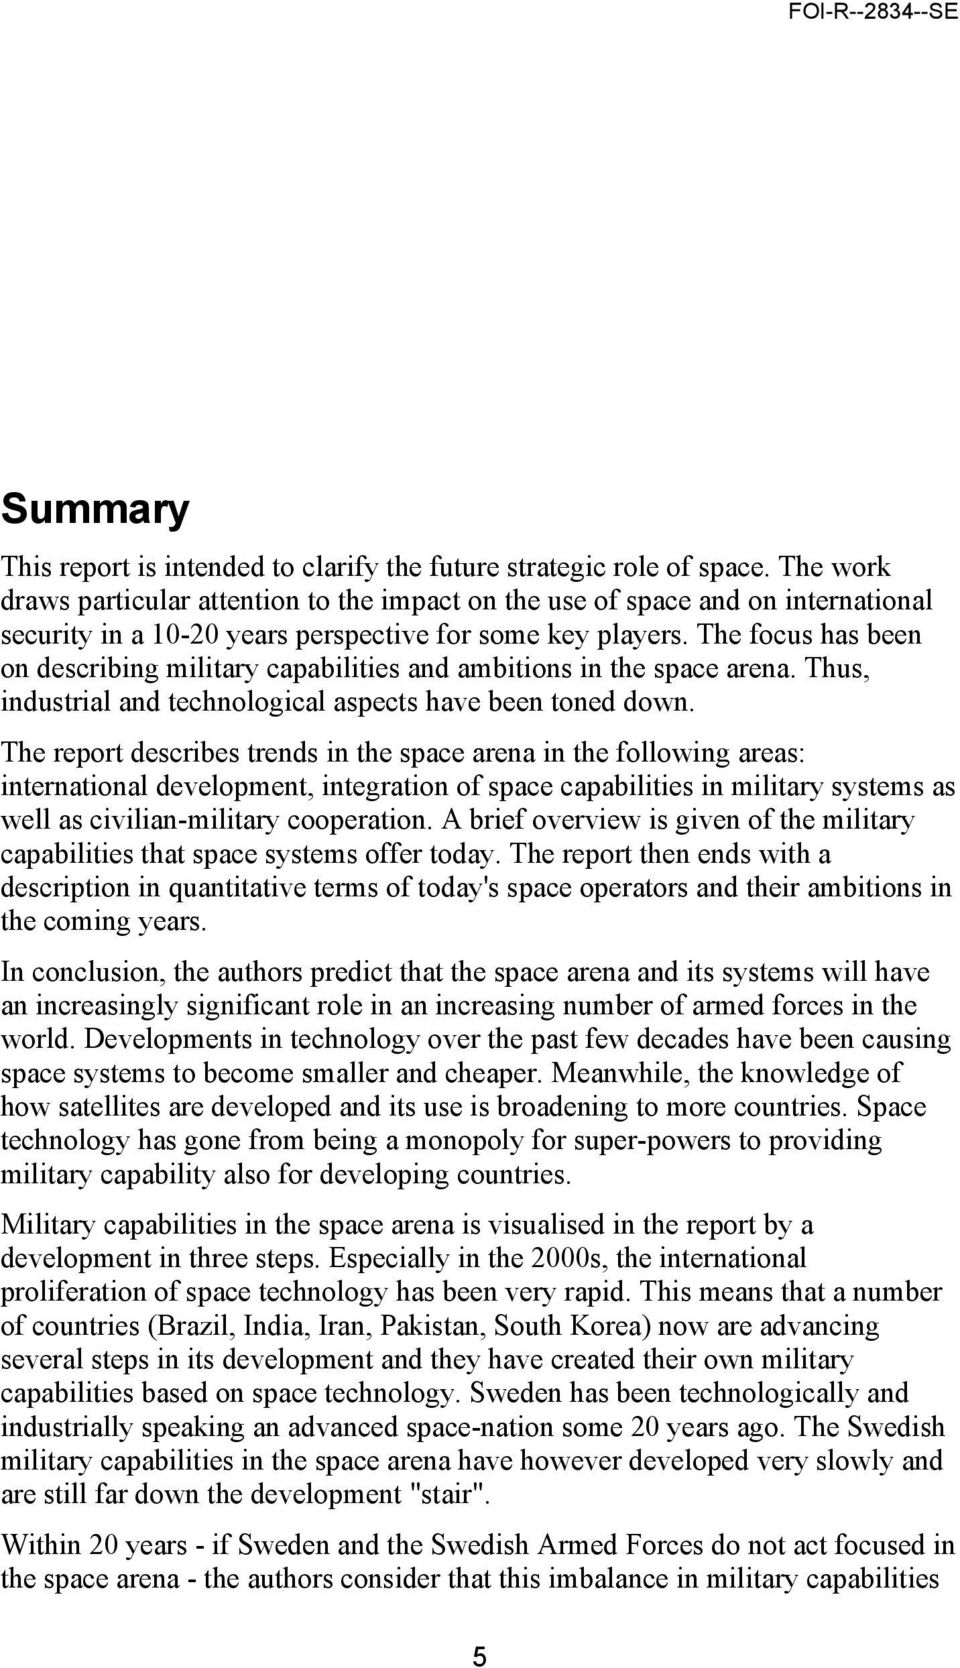 The focus has been on describing military capabilities and ambitions in the space arena. Thus, industrial and technological aspects have been toned down.